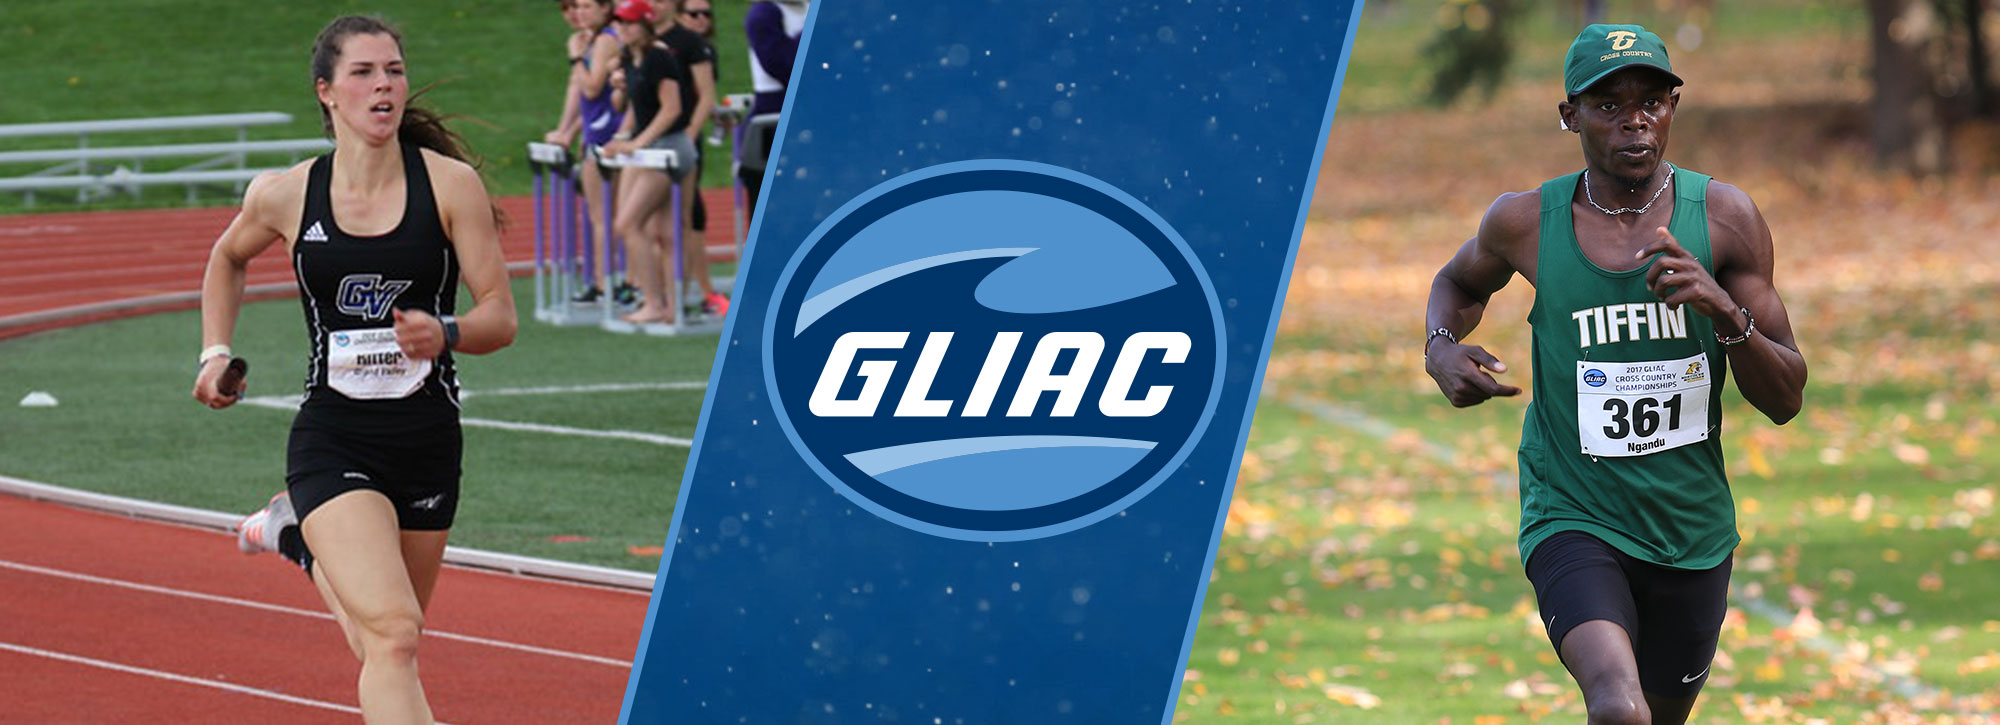 Grand Valley State's Ritter, Tiffin's Ngandu Named 2017-18 GLIAC Scholar-Athletes of the Year